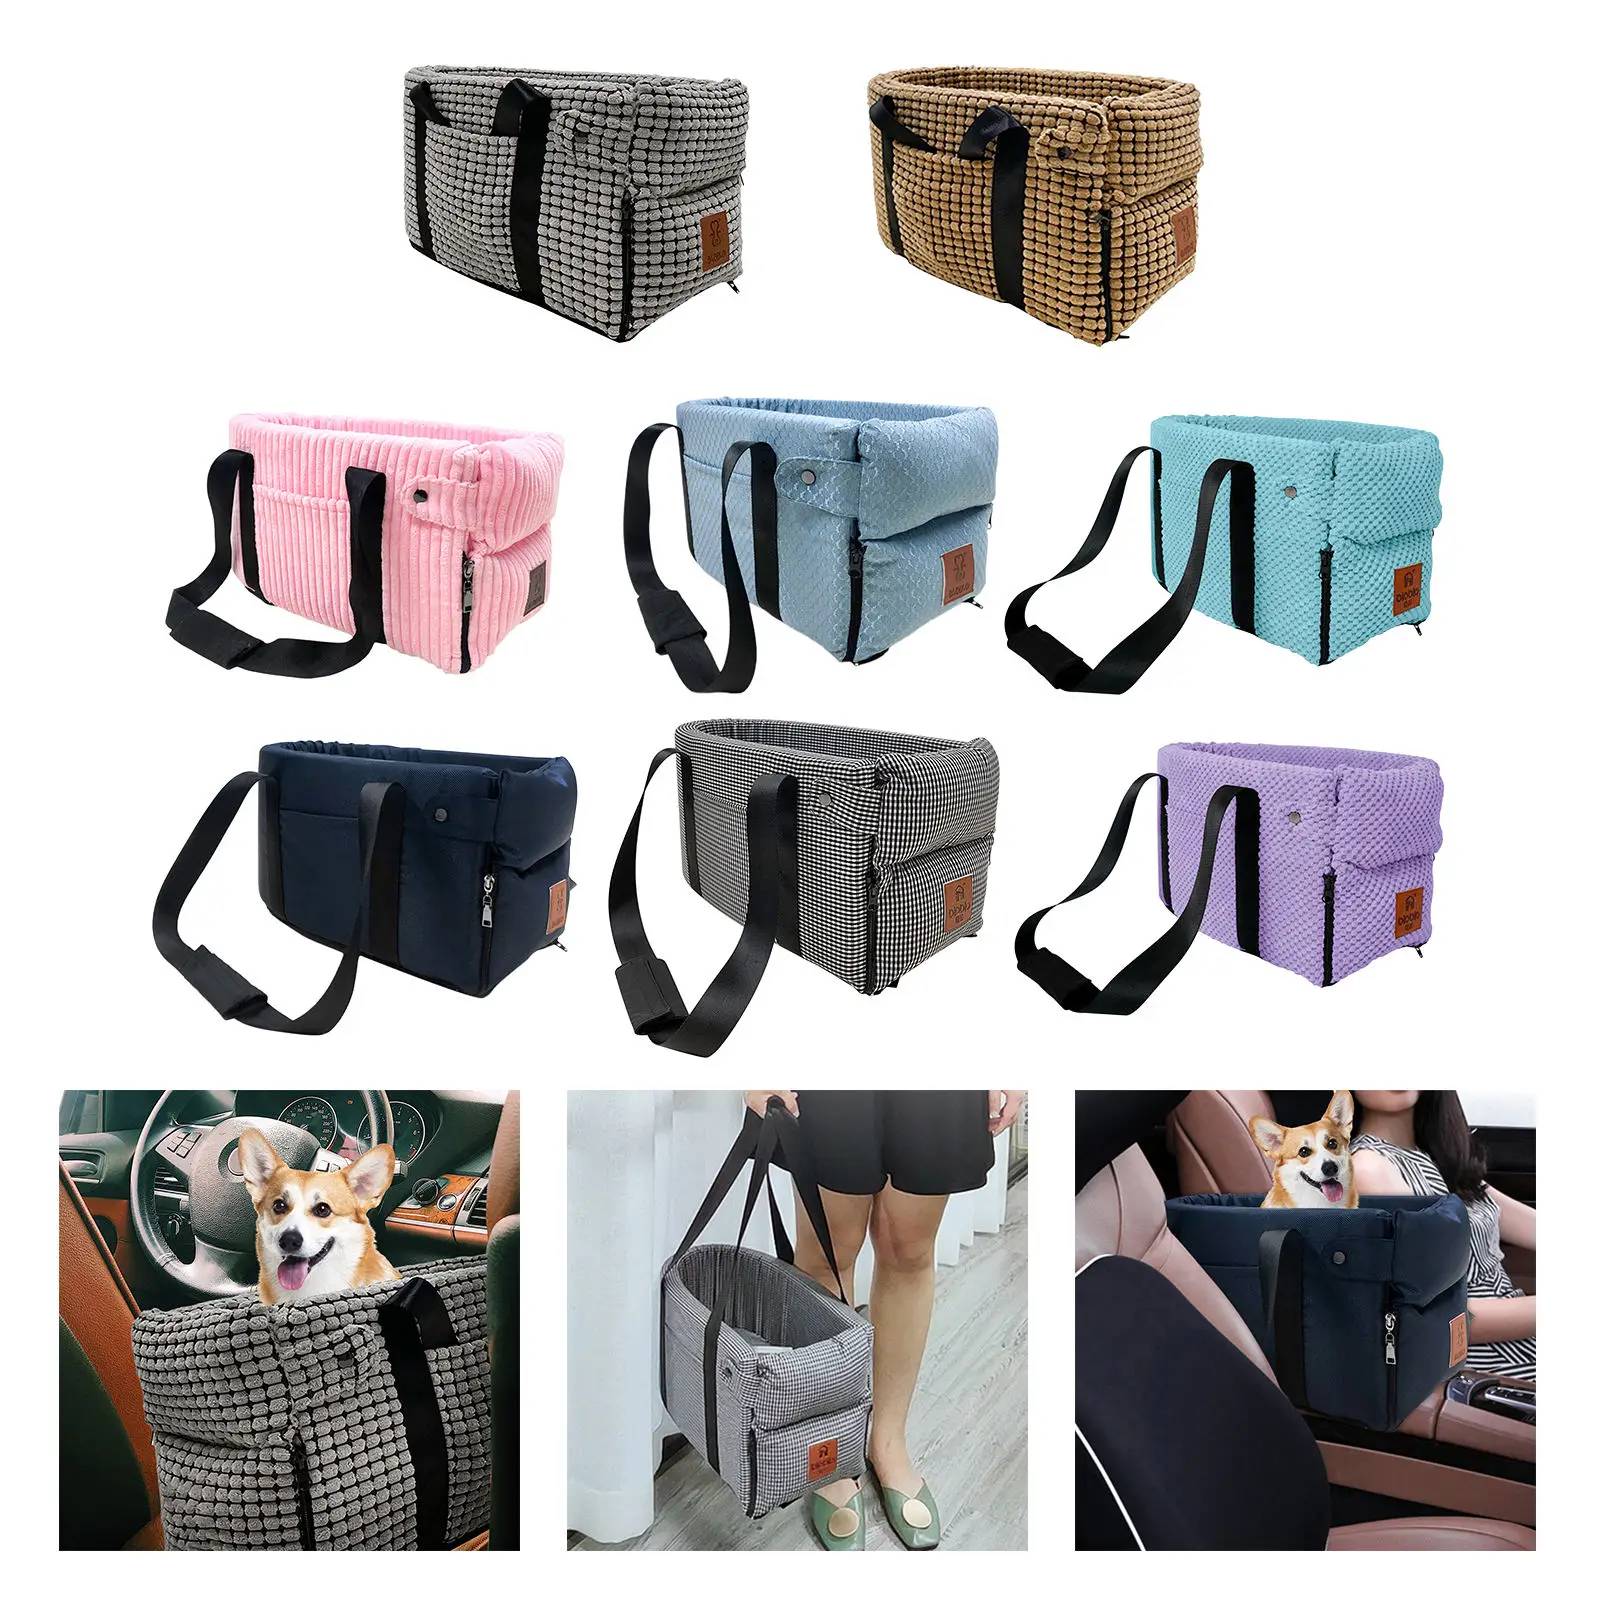 

Safety Dog Car Seat with Storage Pockets Washable Removable Kennel Bed booster Carrier for Outdoor Travel Armrest Box Puppy Pet